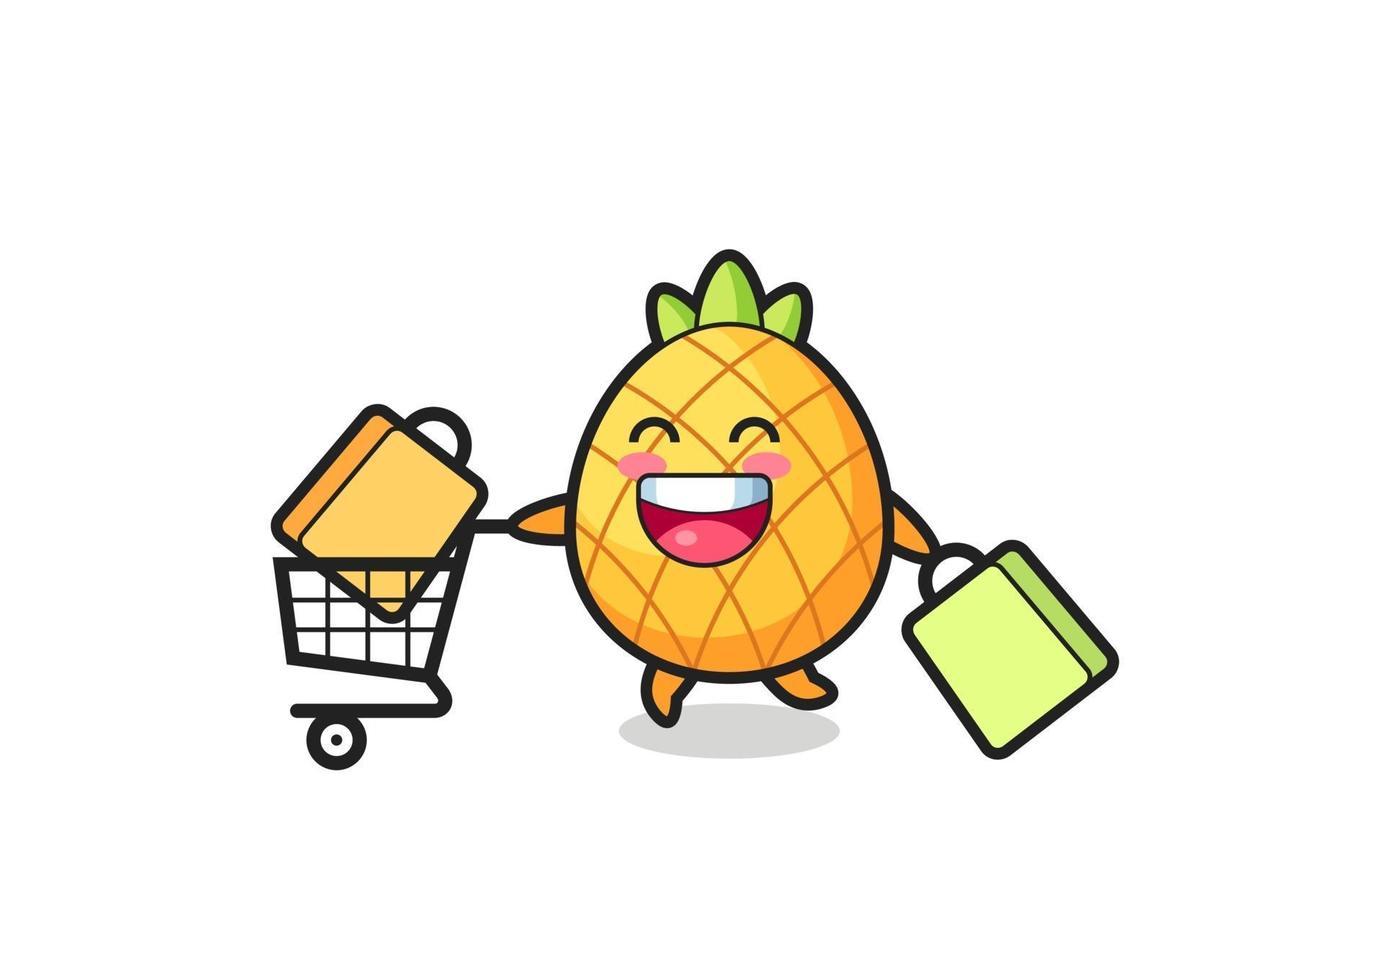 black Friday illustration with cute pineapple mascot vector